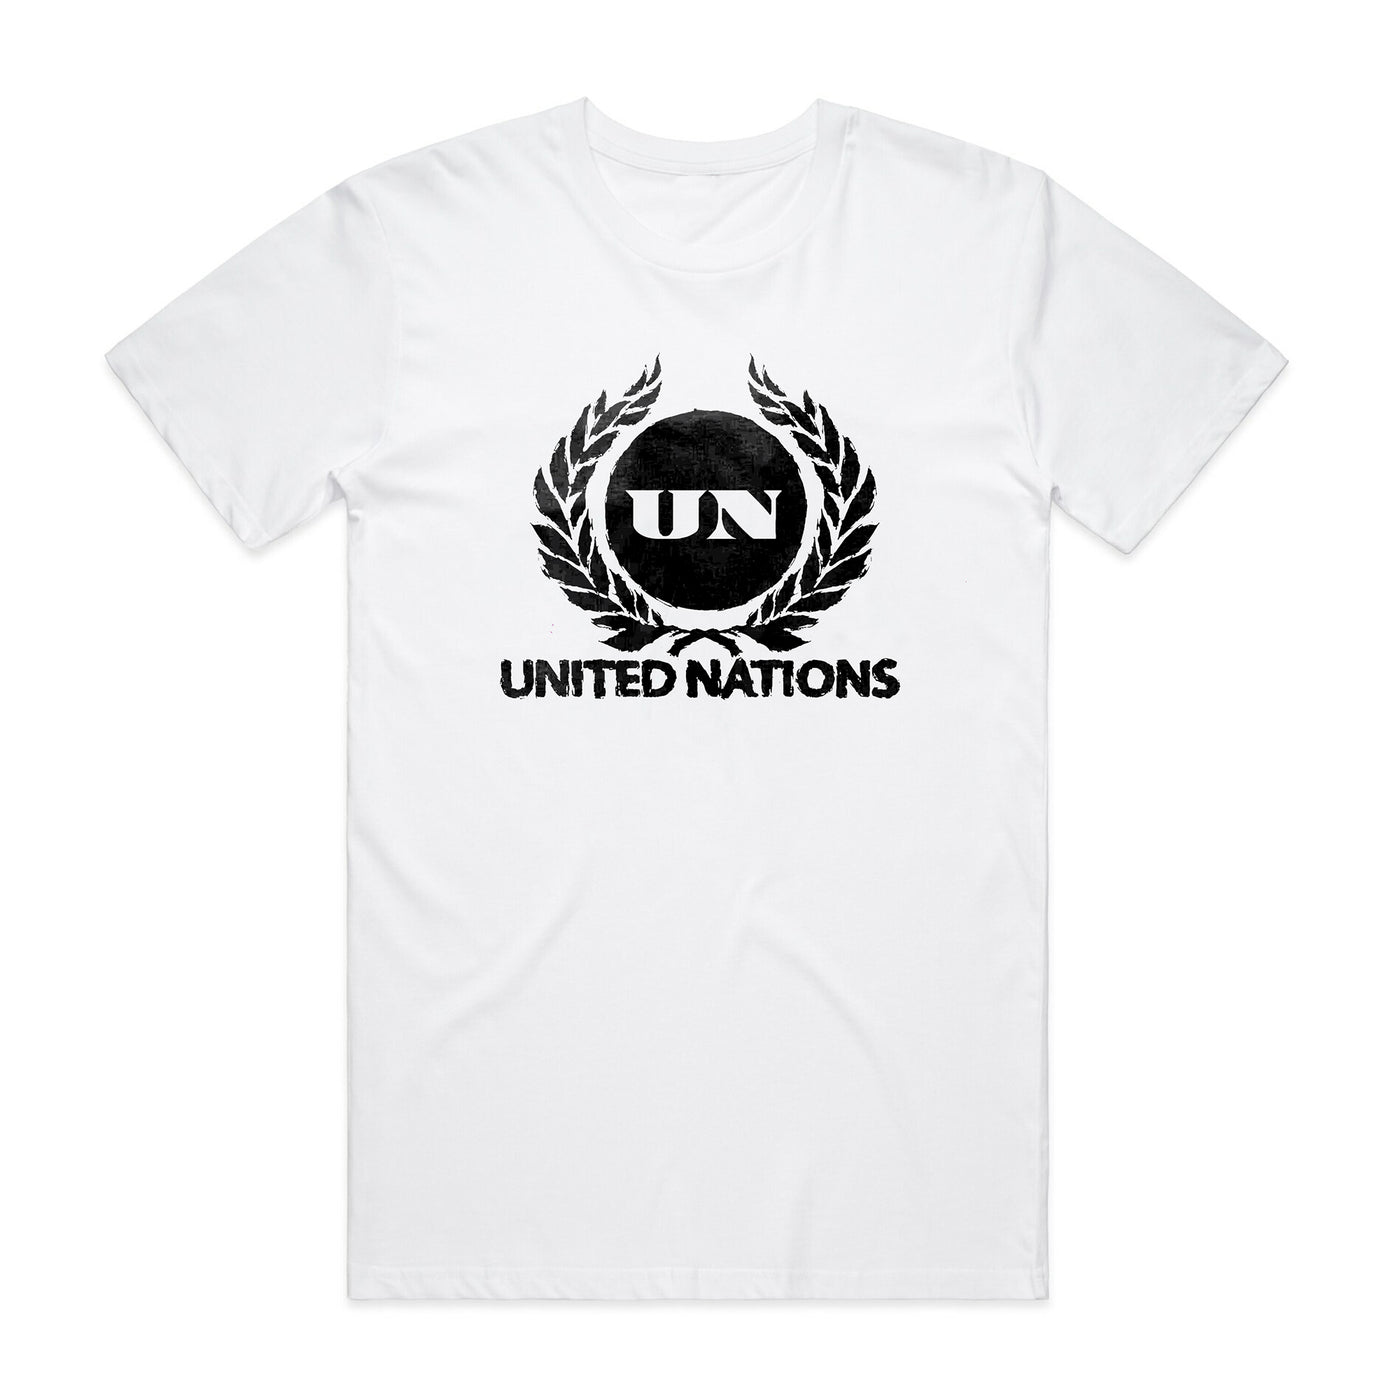 United Nations Tee - White